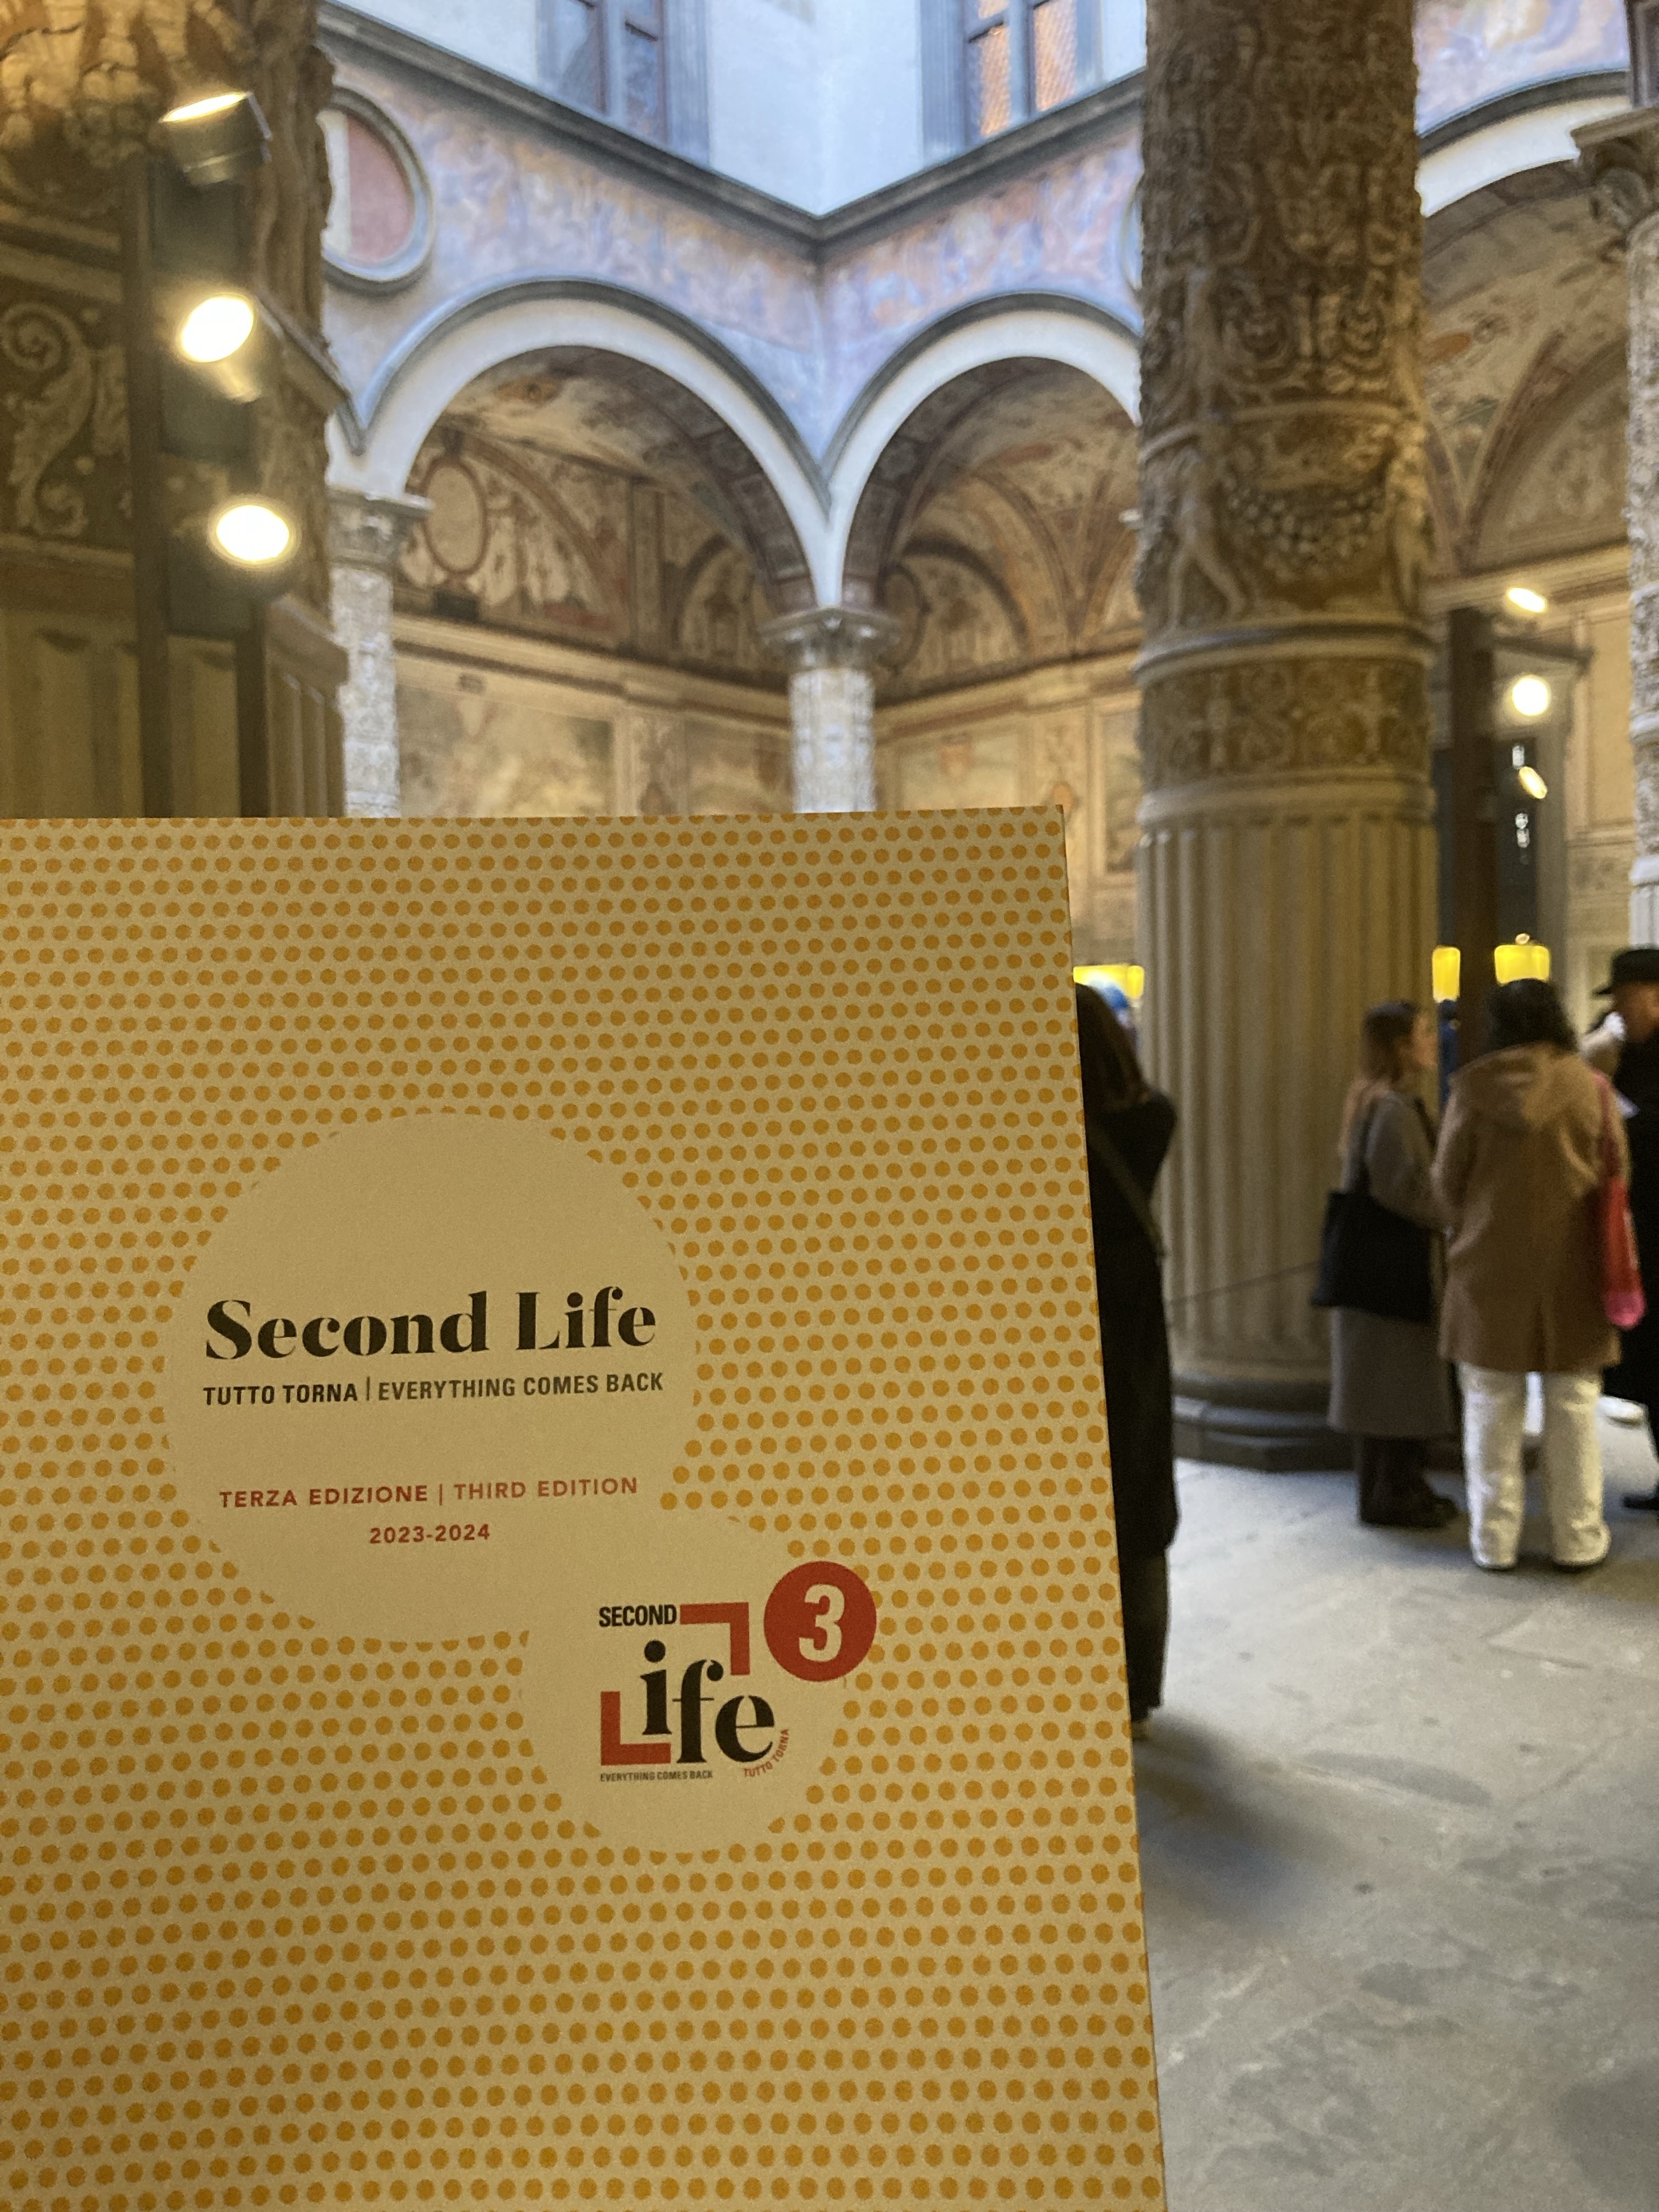 Fondazione MAIRE is partner of the third edition  of "Second Life, Tutto torna".